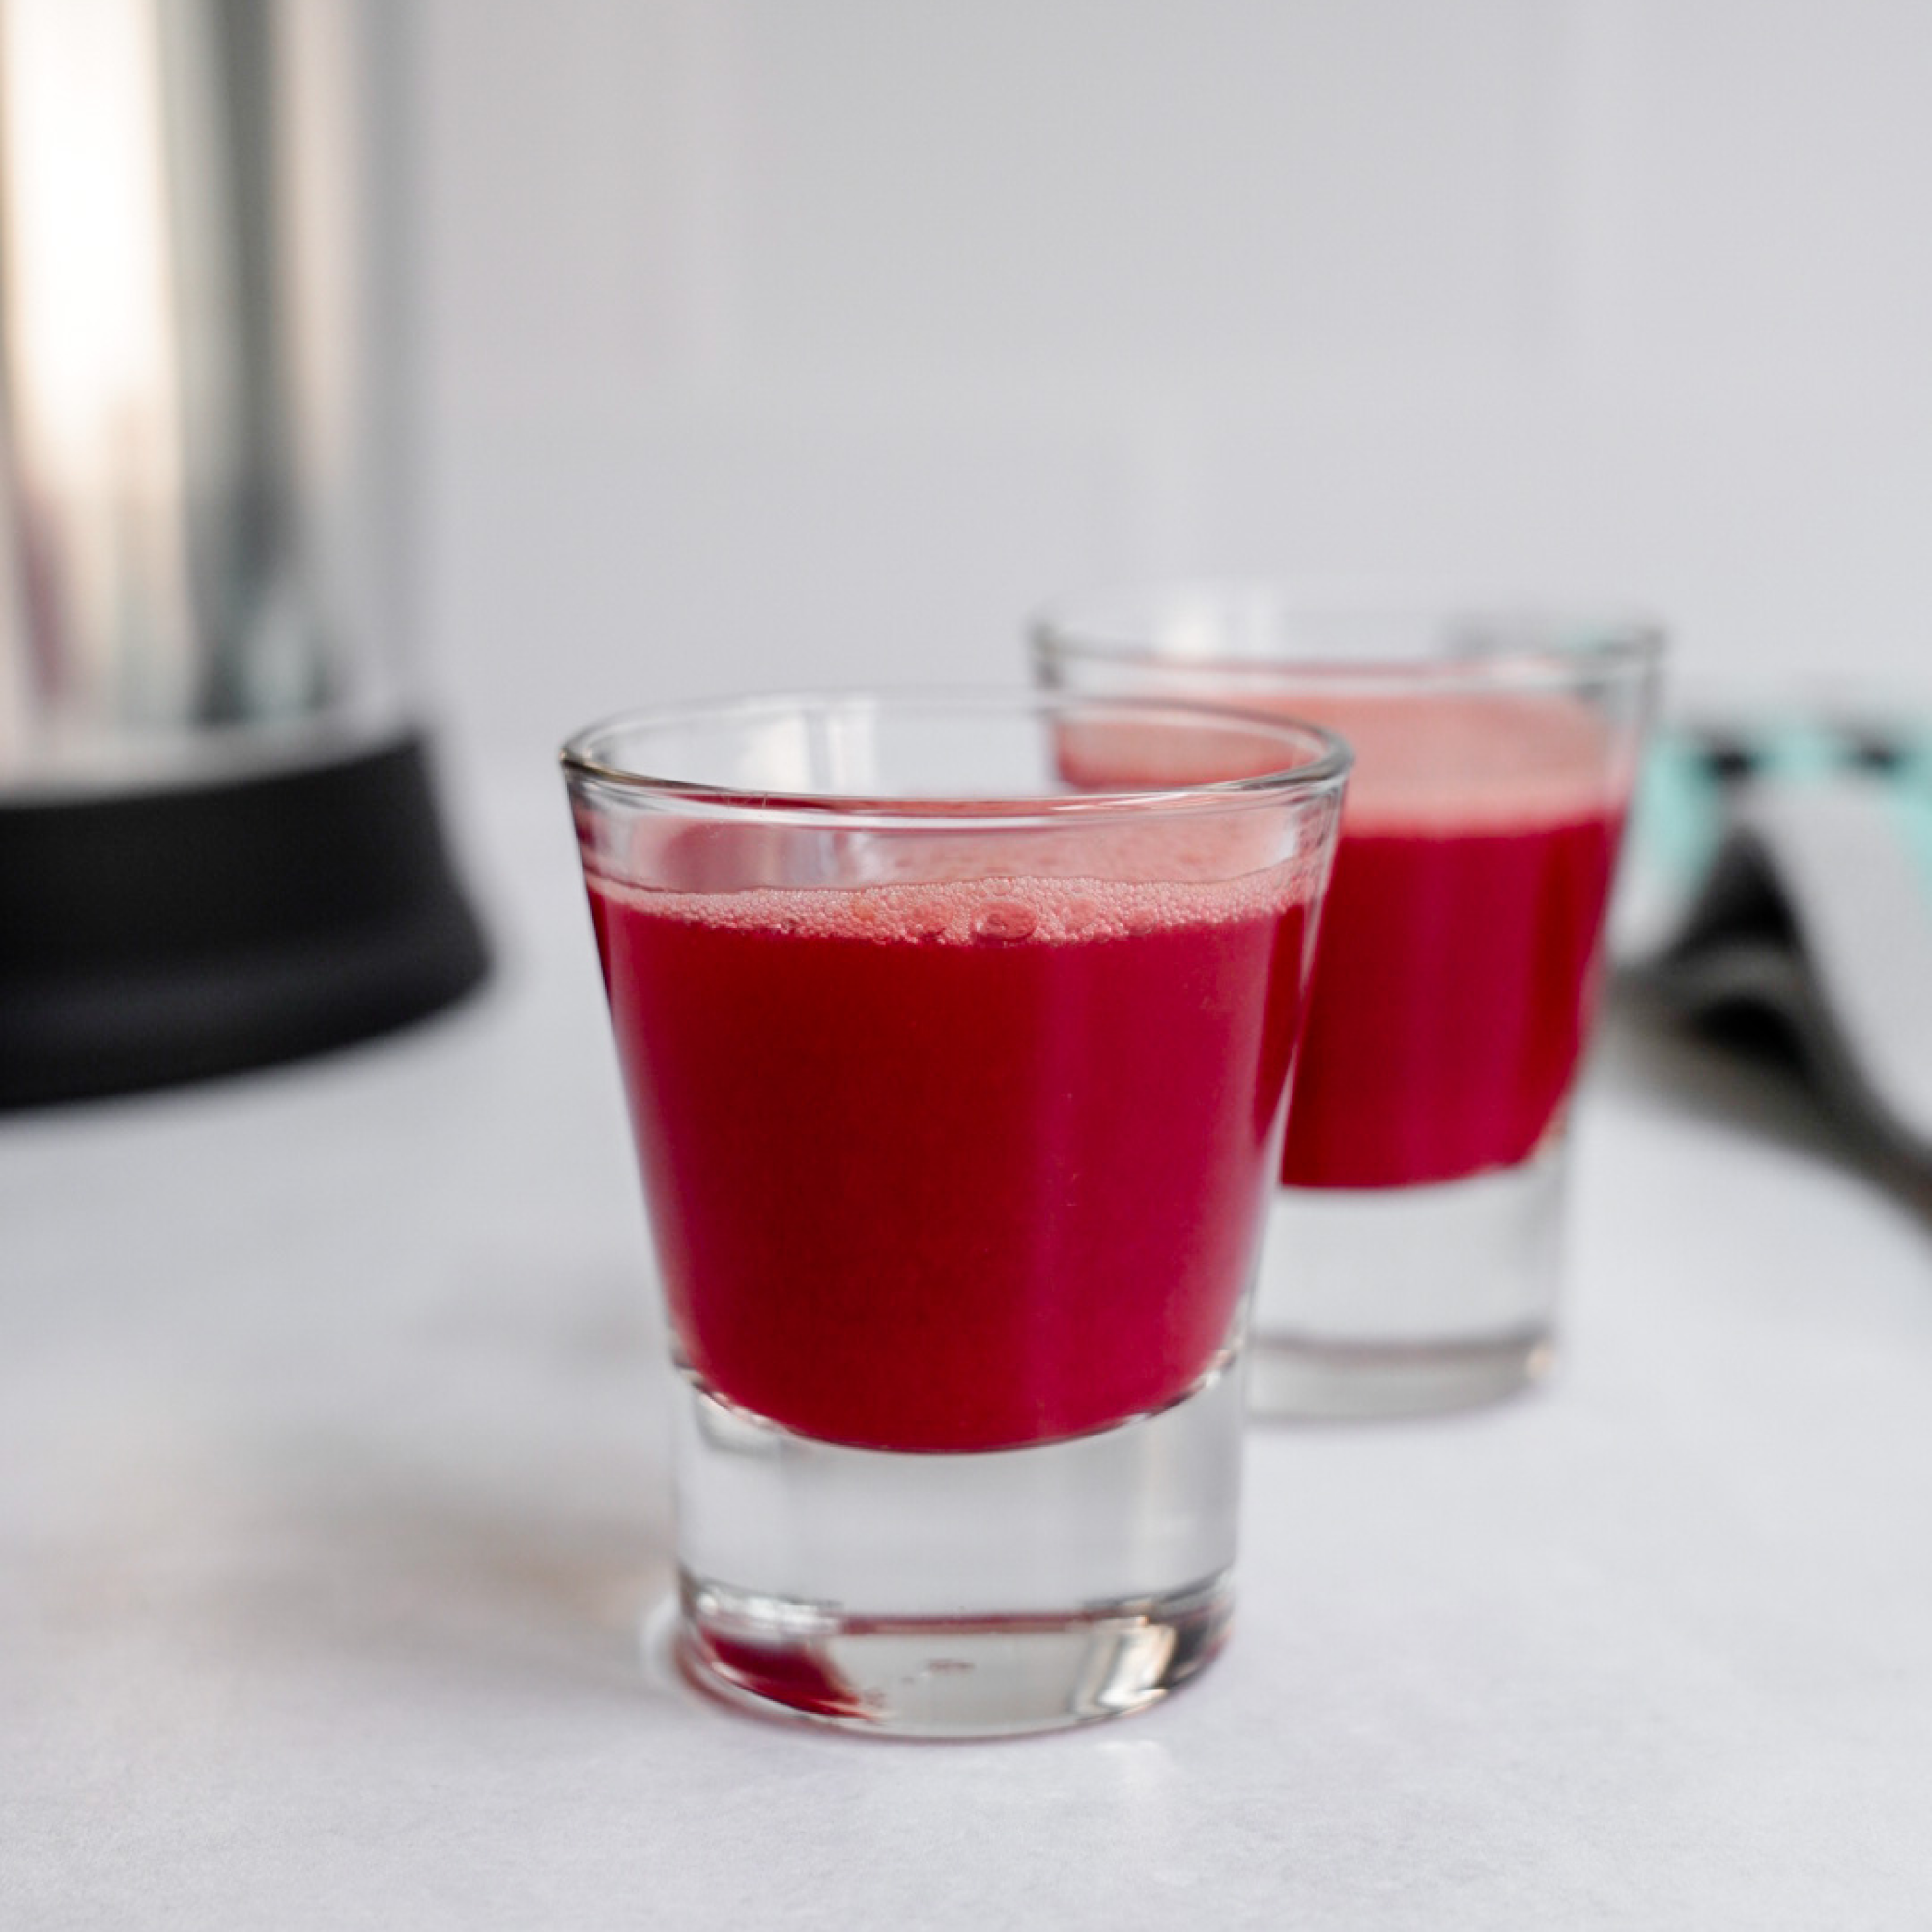 Power Wellness Shots made in the Almond Cow